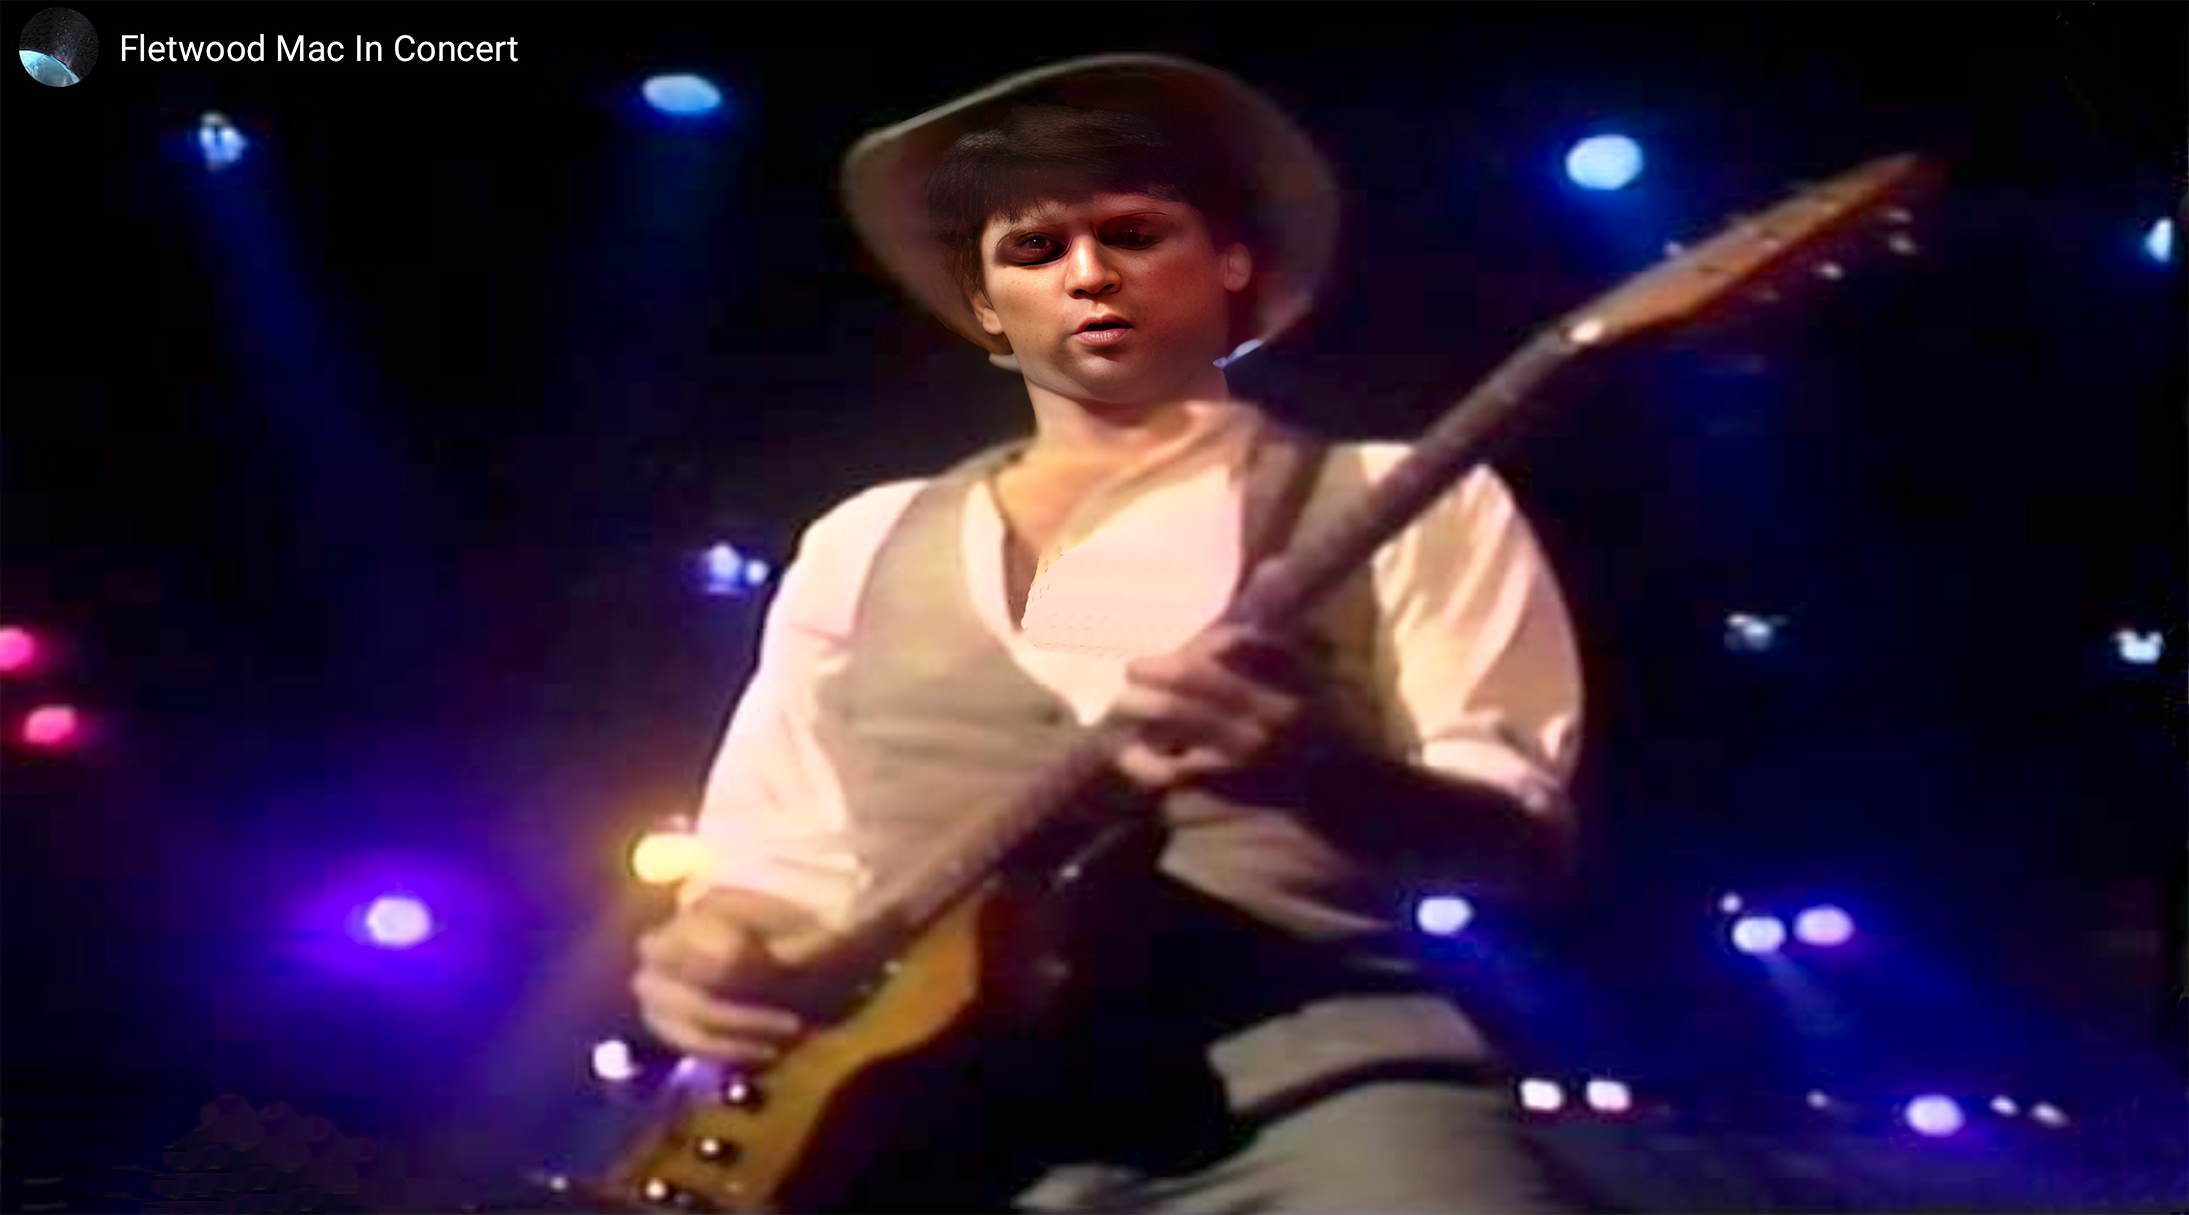 Load video: On October 21st &amp; 22nd, 1982, Fleetwood Mac&#39;s &quot;In Concert - Mirage Tour &#39;82&quot; was filmed at The Great Western Forum in Inglewood, California.  This was recorded i pure hifi stereo and on video ... there was in fact certain problem as the &quot;stereo-video&quot; was new on the market at that time ... problem to make tape/machines that could hold the &quot;two channel&quot; separated and with a good quality on an entire tape ... we vent to the store to complain this video (among of many others video-concerts, to have a new one that worked) at least four times ... we simply get tired and gave up ... But I guess there is tape that hold the Quality! ... enjoy it anyway, and if you are lucky ... it will be remastered. We do not hold Copyright but the video is out of print. I will gladly remove if contacted by the rights holder.